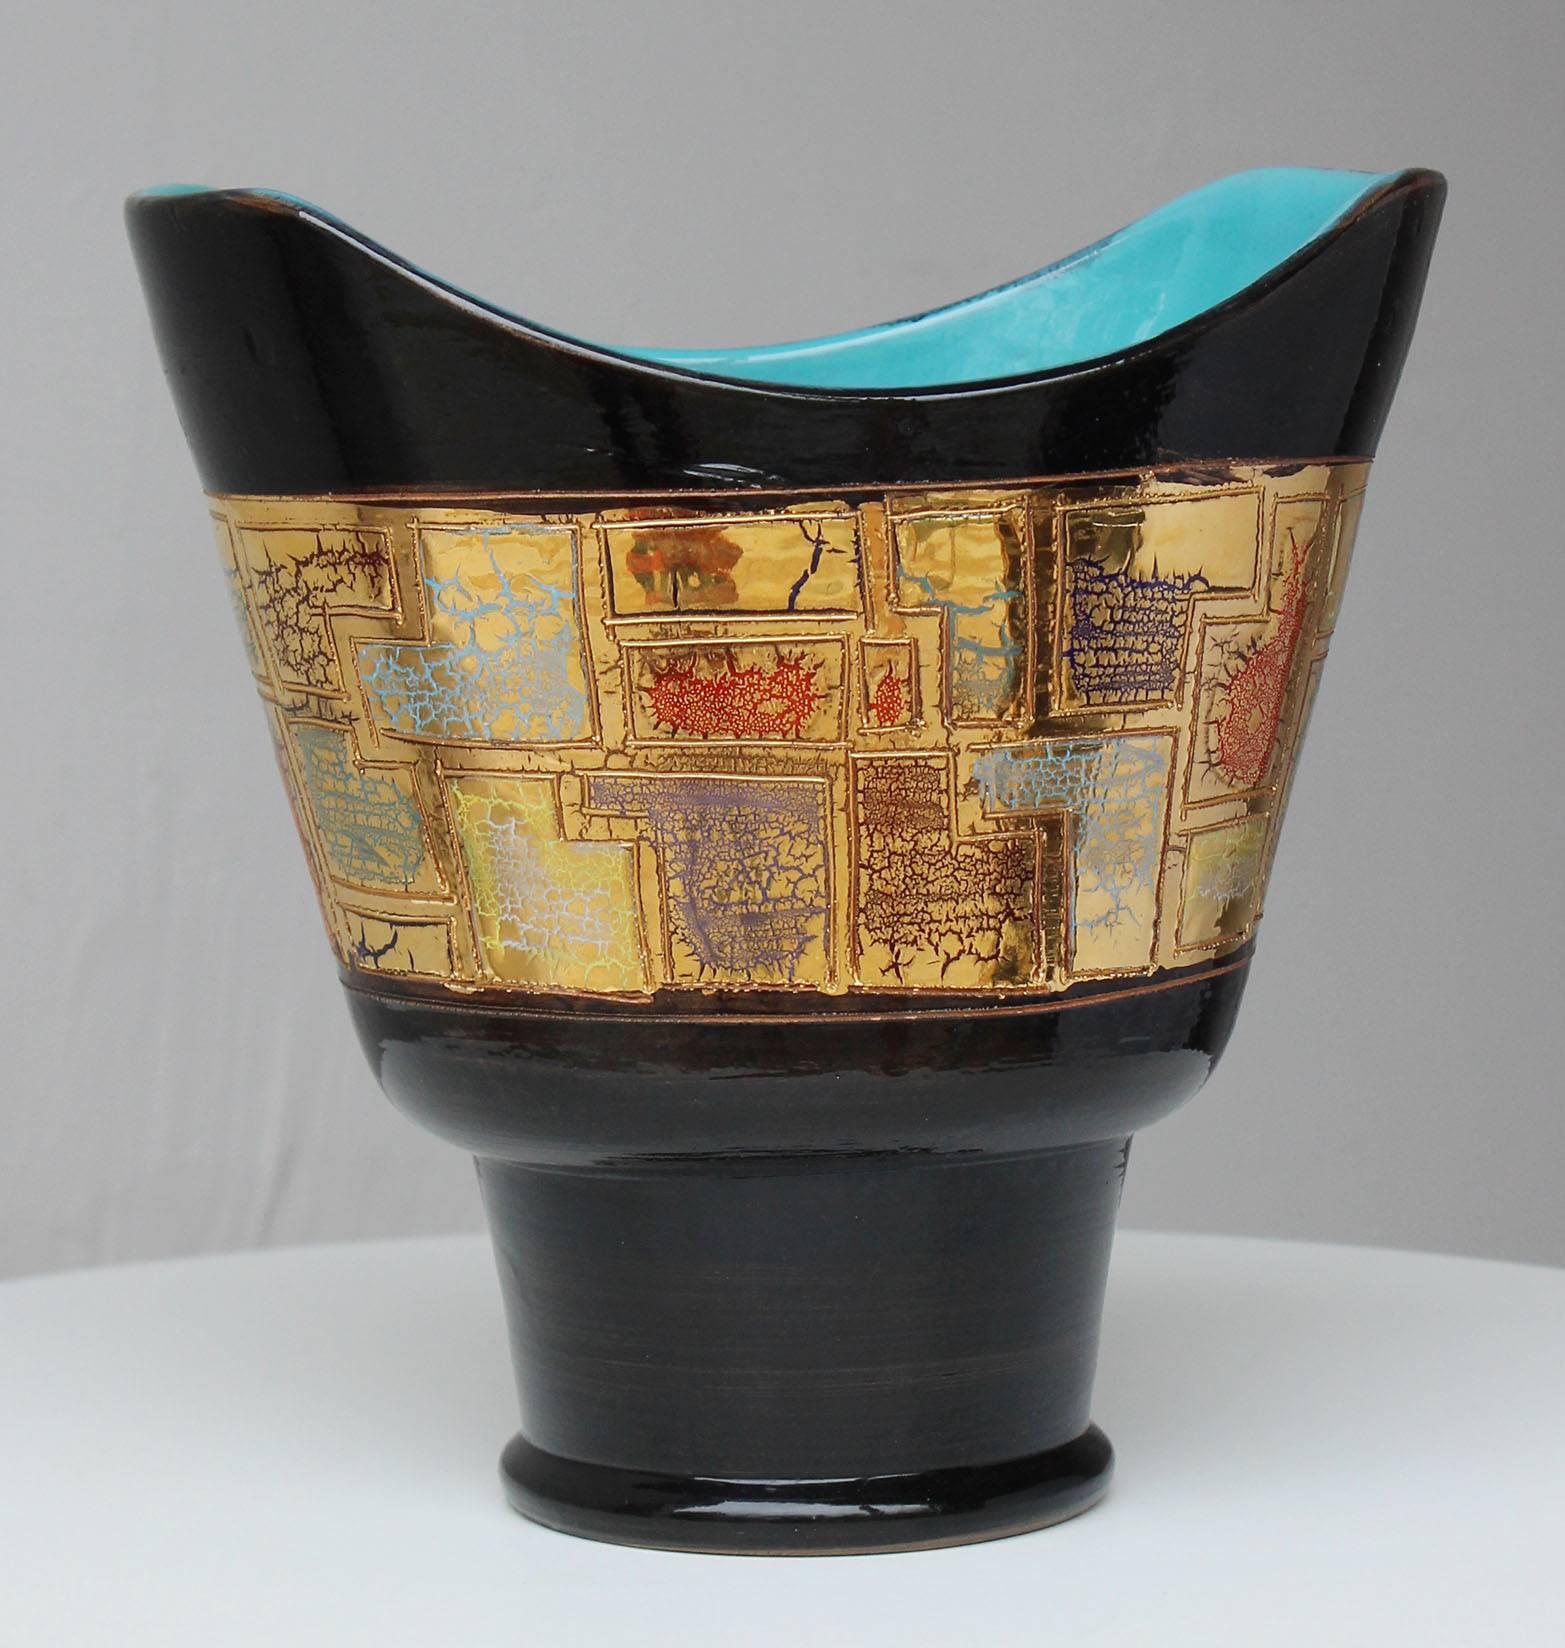 A gorgeous mid-century metallic gold crackle glaze band vase surrounded by sumptuous gloss black with turquoise interior.

